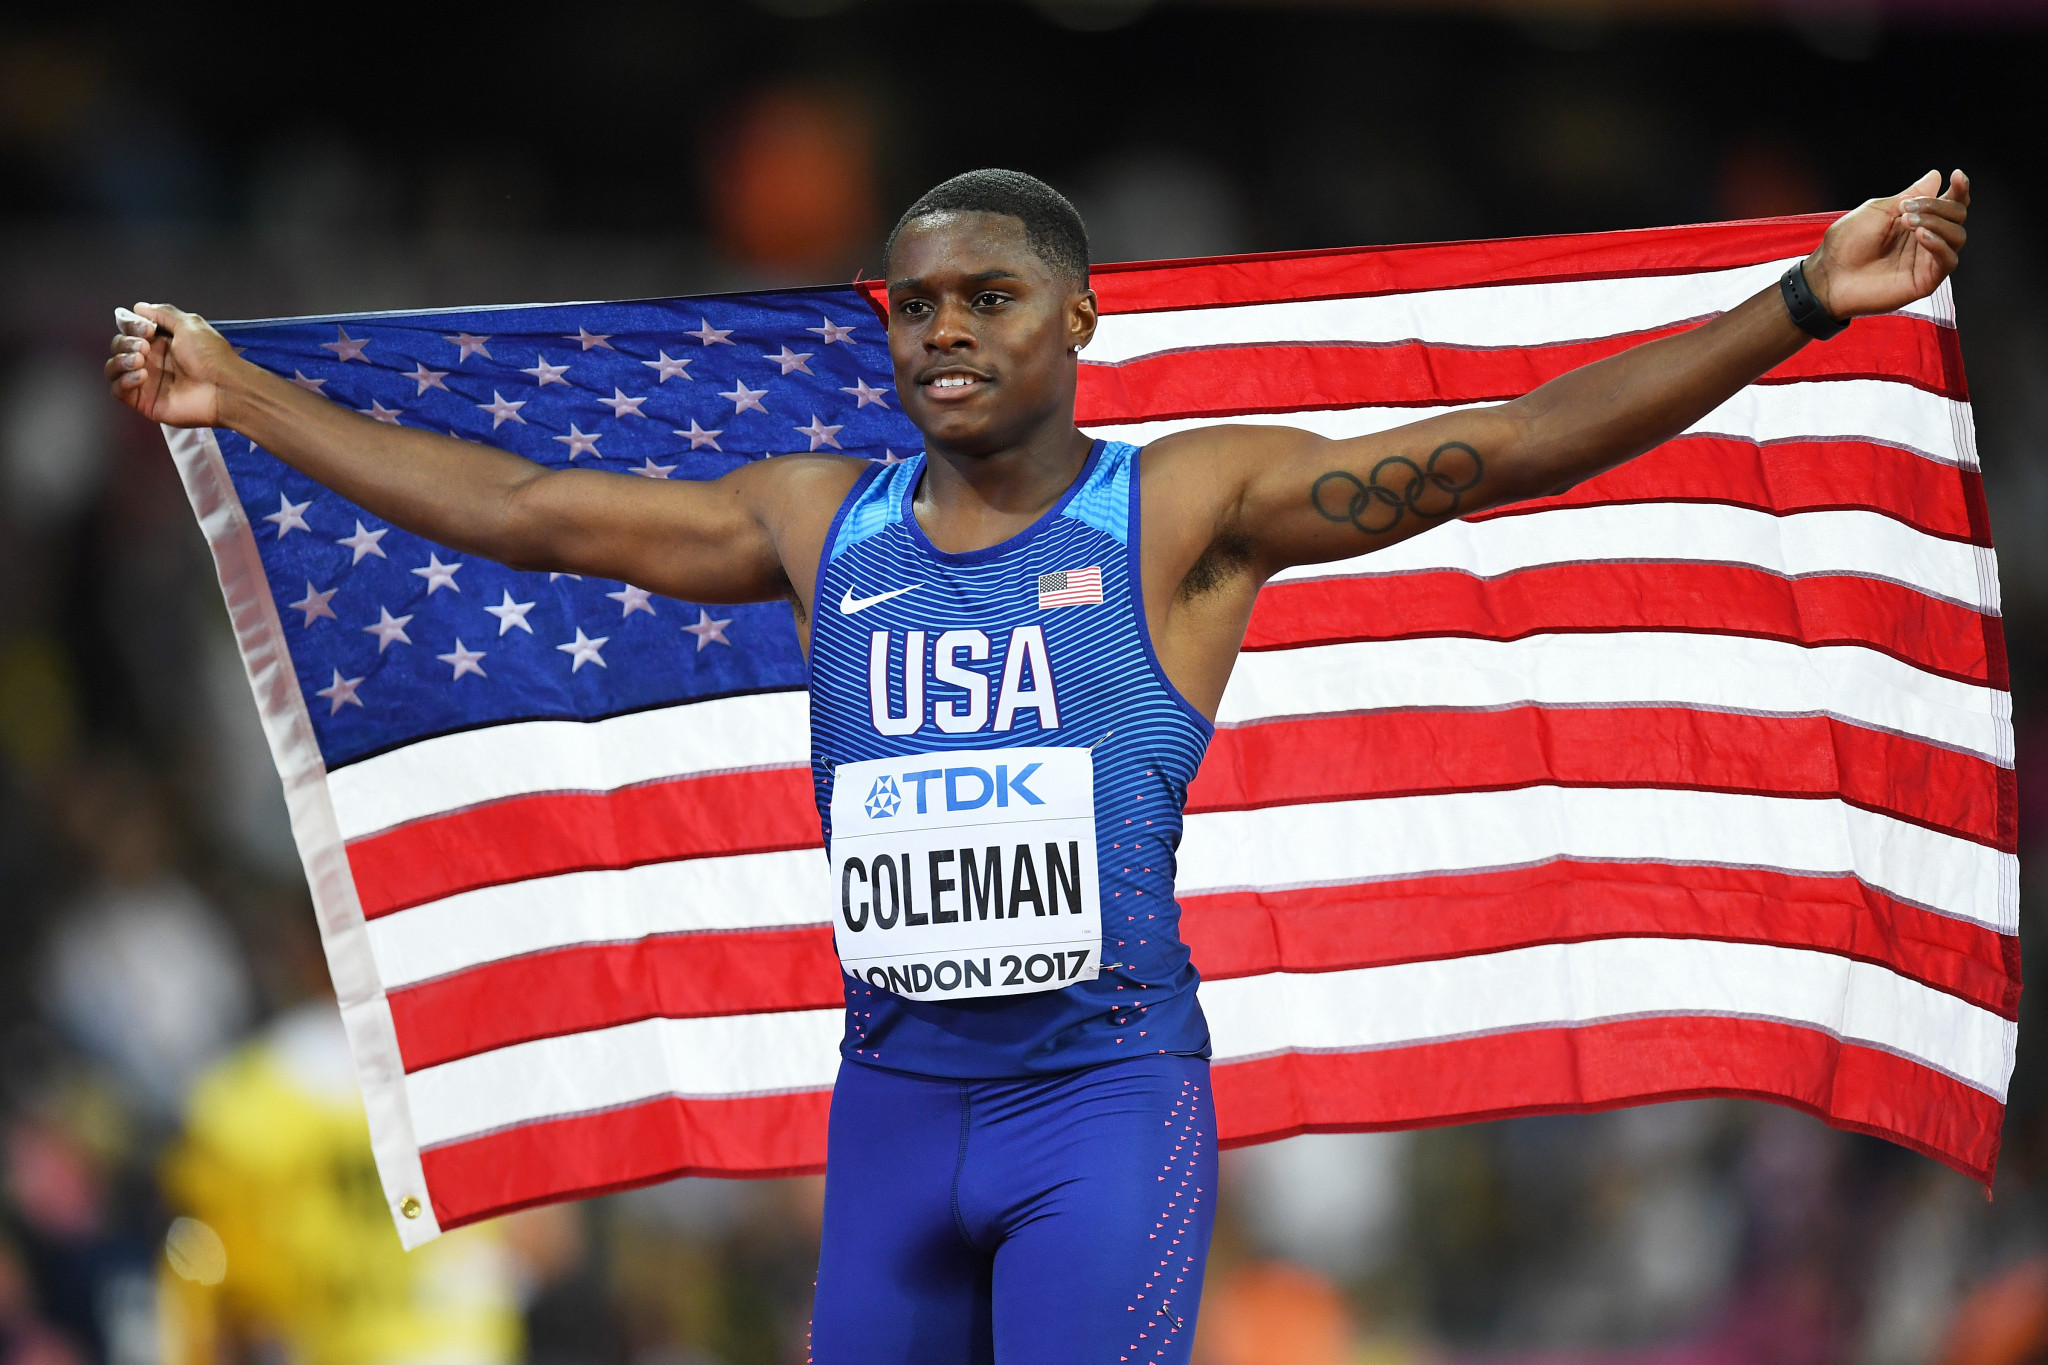 Christian Coleman is one of two American track and field athletes already banned for whereabouts failures this year ©Getty Images